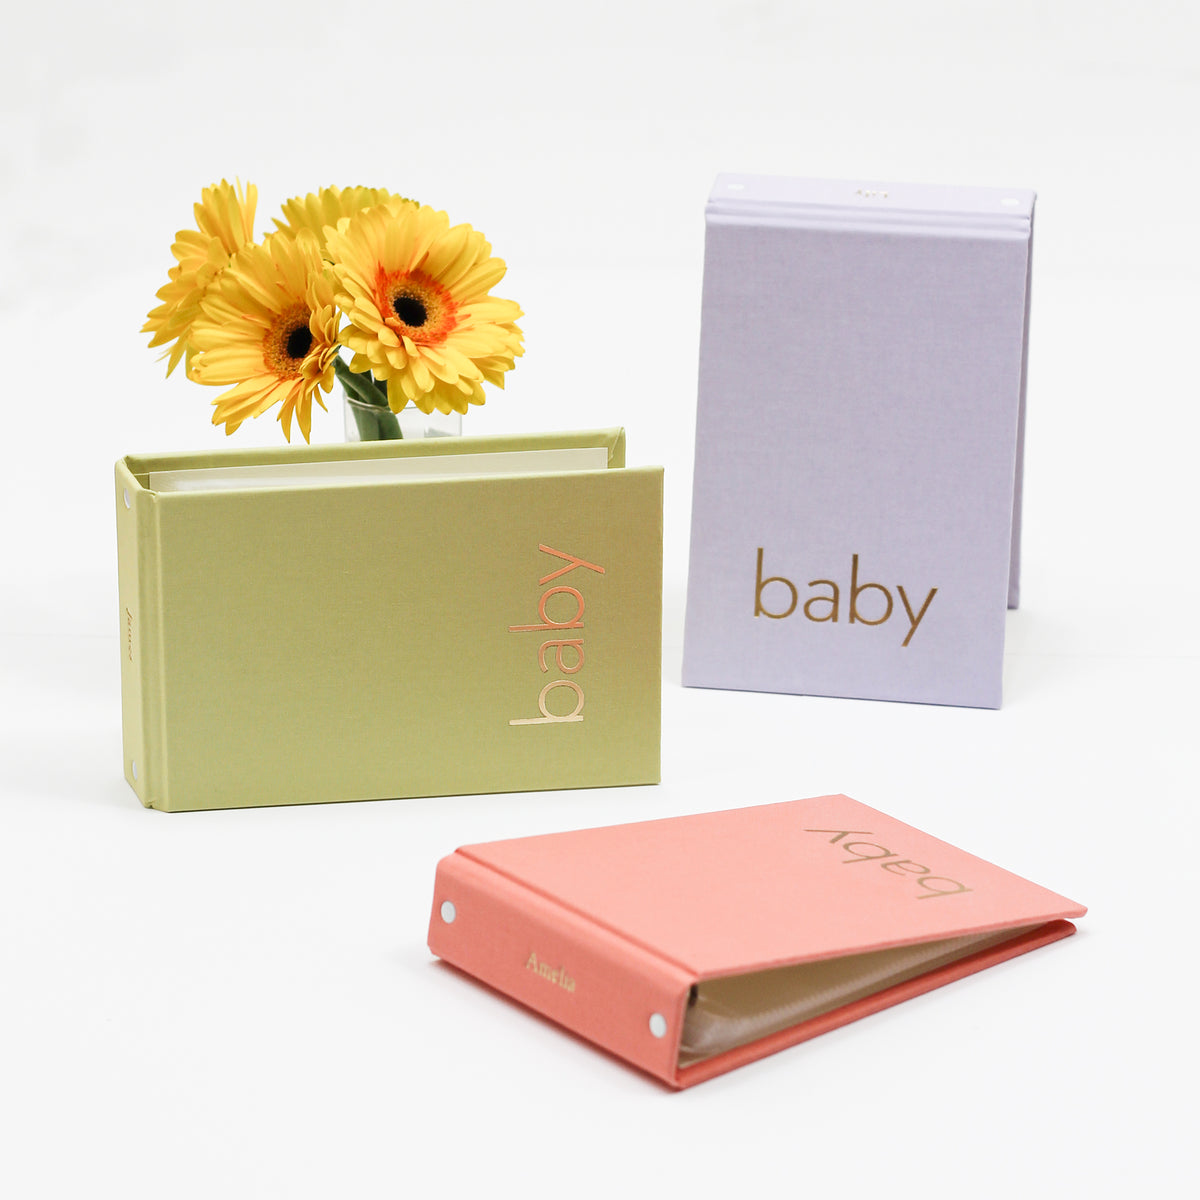 Small Baby Photo Binder | for 4x6 Photos | with Jade Silk Cover | Includes BABY Title On Cover